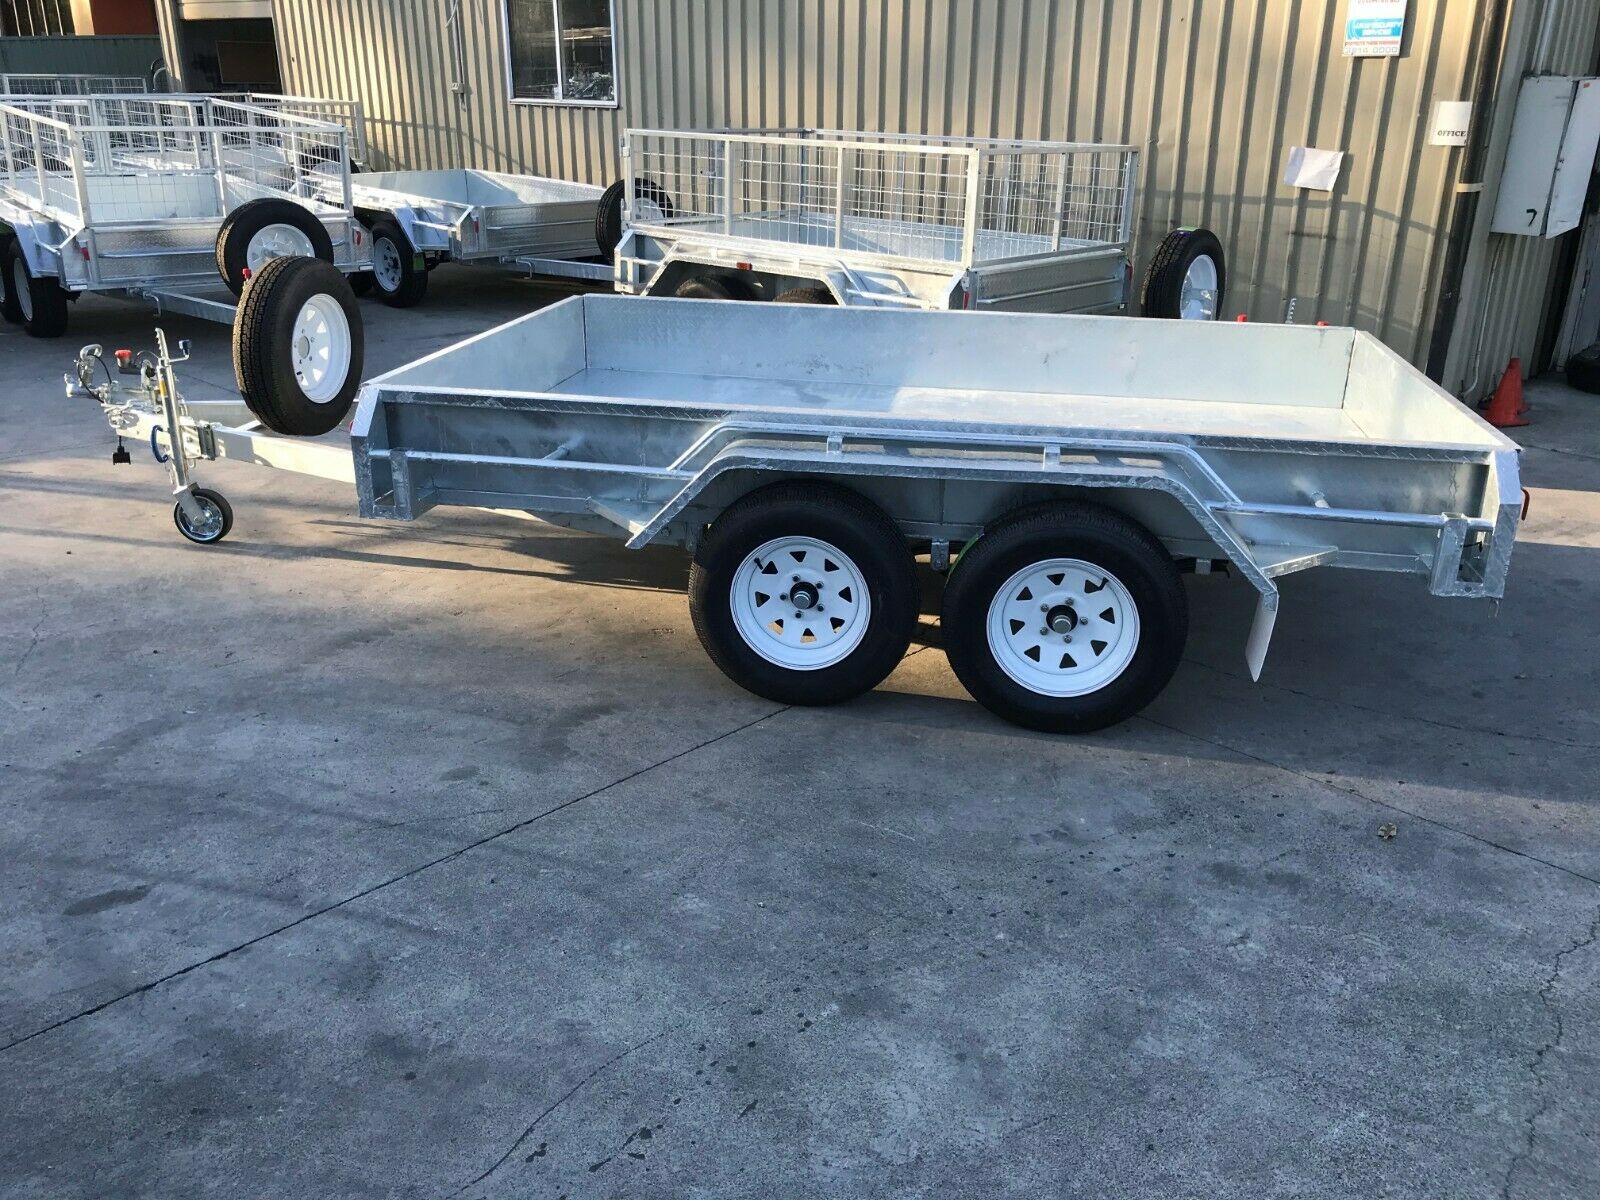 10×6 Tandem Galvanised Box Trailer For Sale Full Checker Plate – Trailer for Sale Brisbane<br><br><span class="galv-import">Imported Trailer</span>